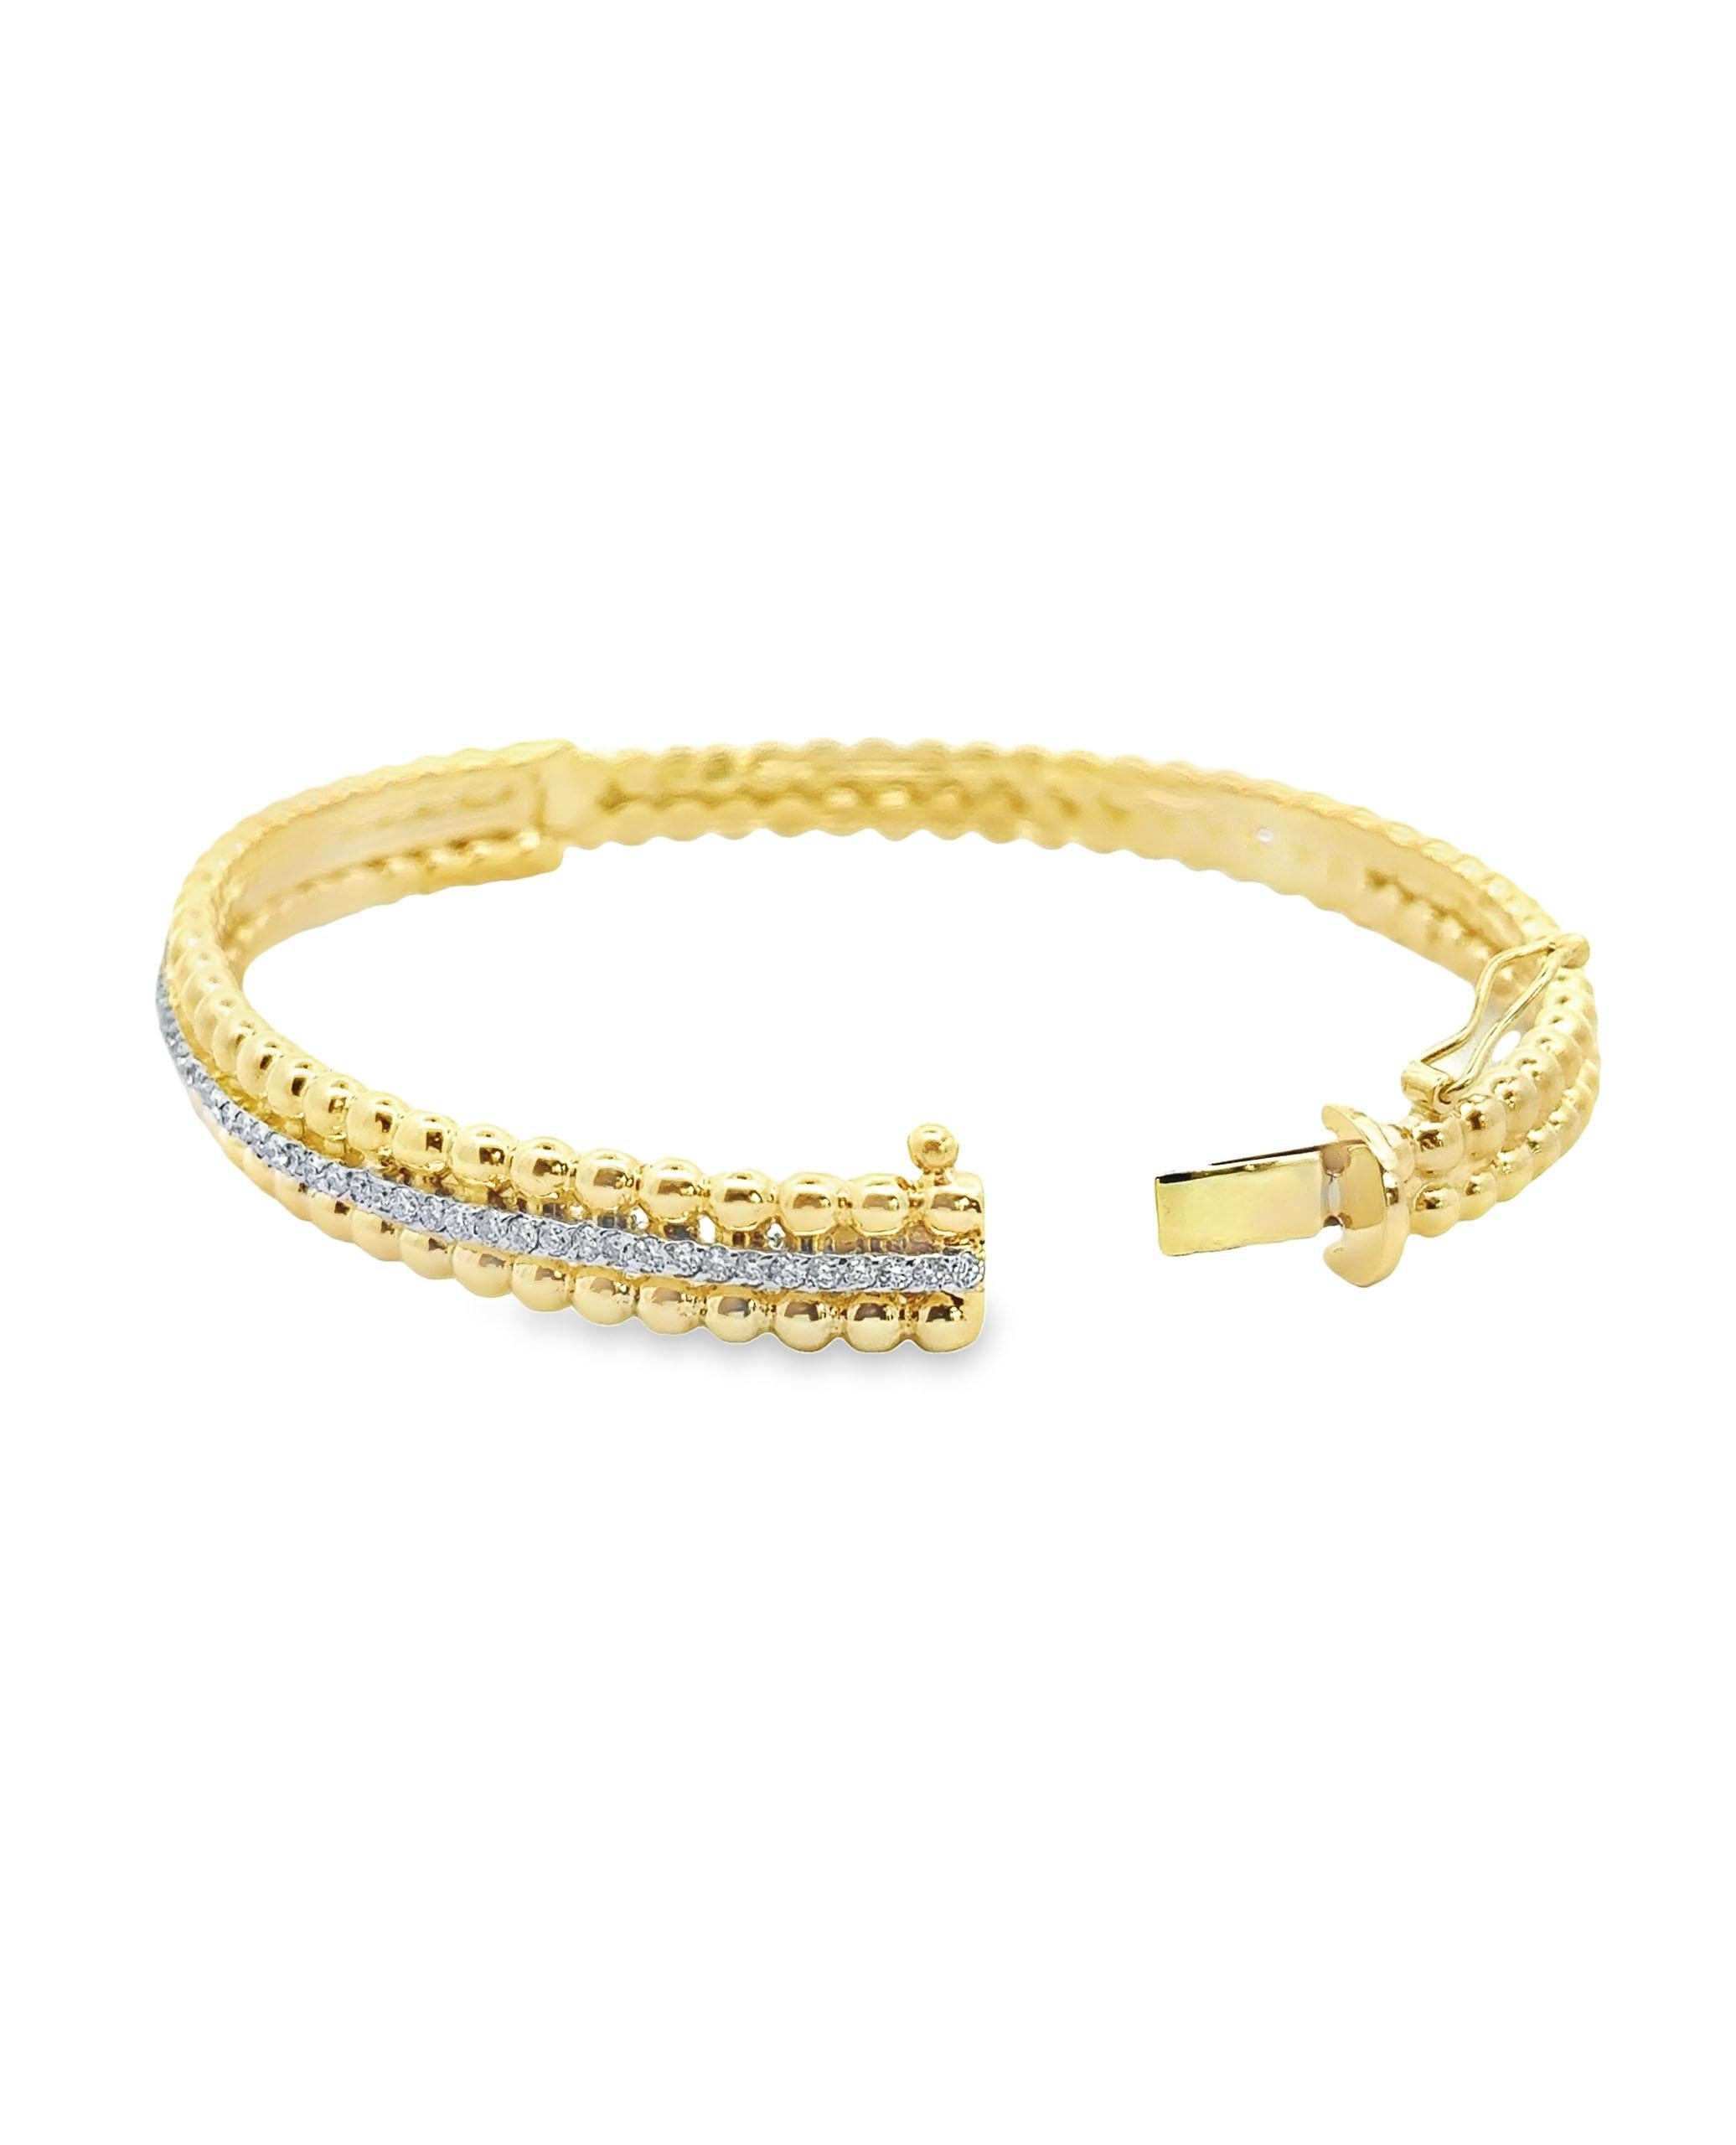 14K yellow gold hinged bangle bracelet with beaded design and a row of round brilliant-cut diamonds weighing 0.80 carats total.

- Diamonds are G/H color, SI2 clarity.
- Fits a 7 inch wrist.
- Figure eight safety clasp.